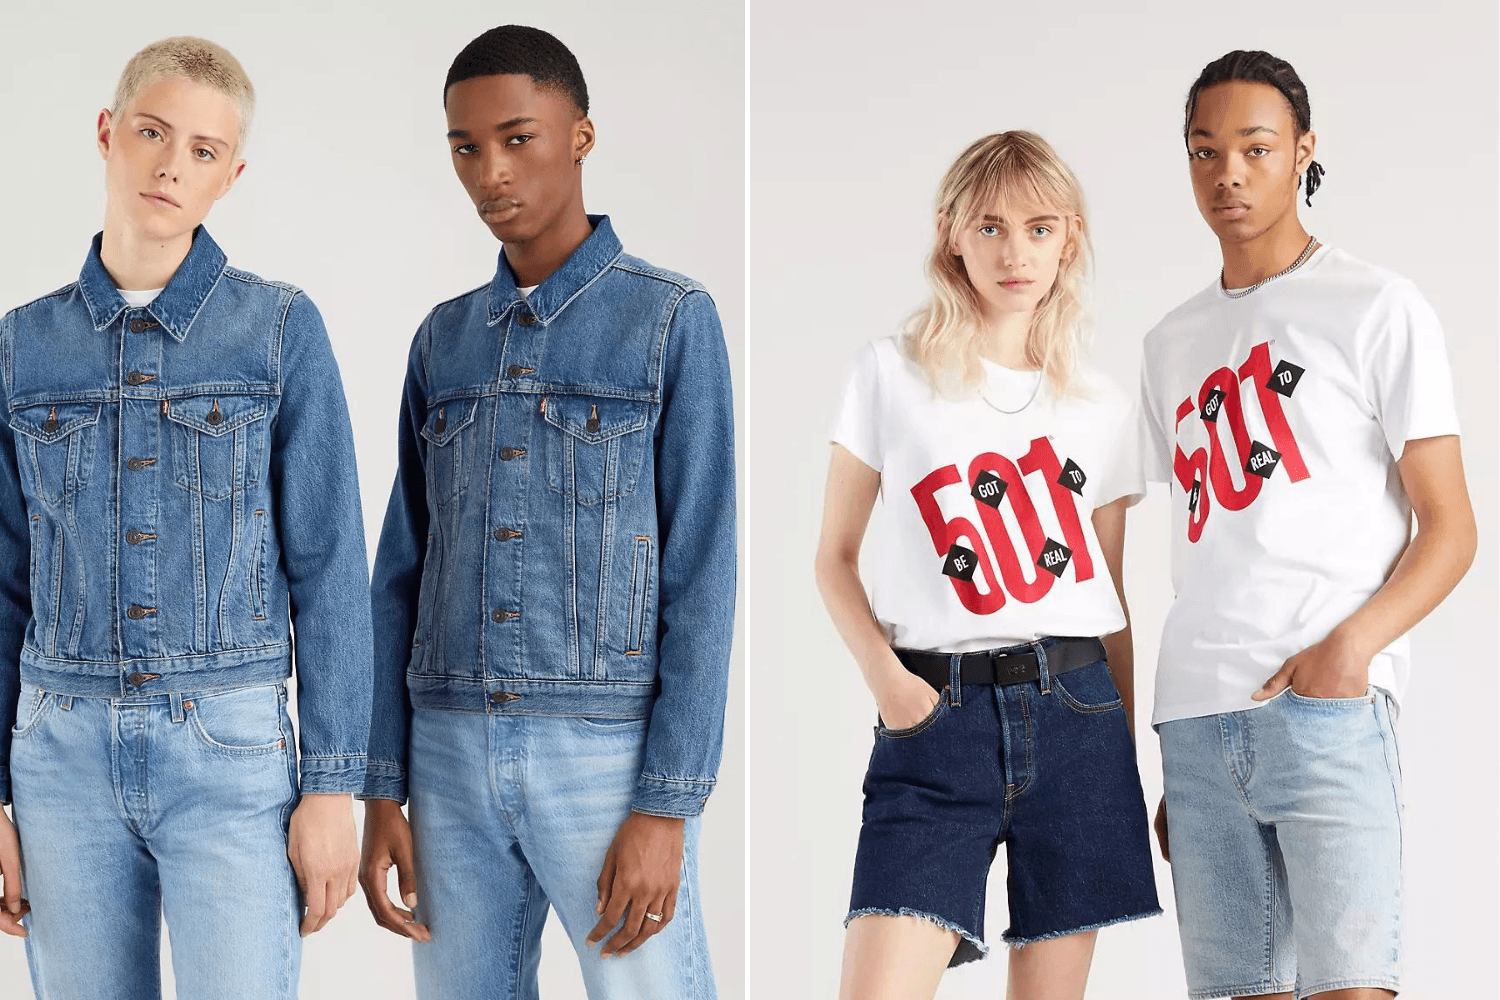 The new genderless collection from Levi's is now online